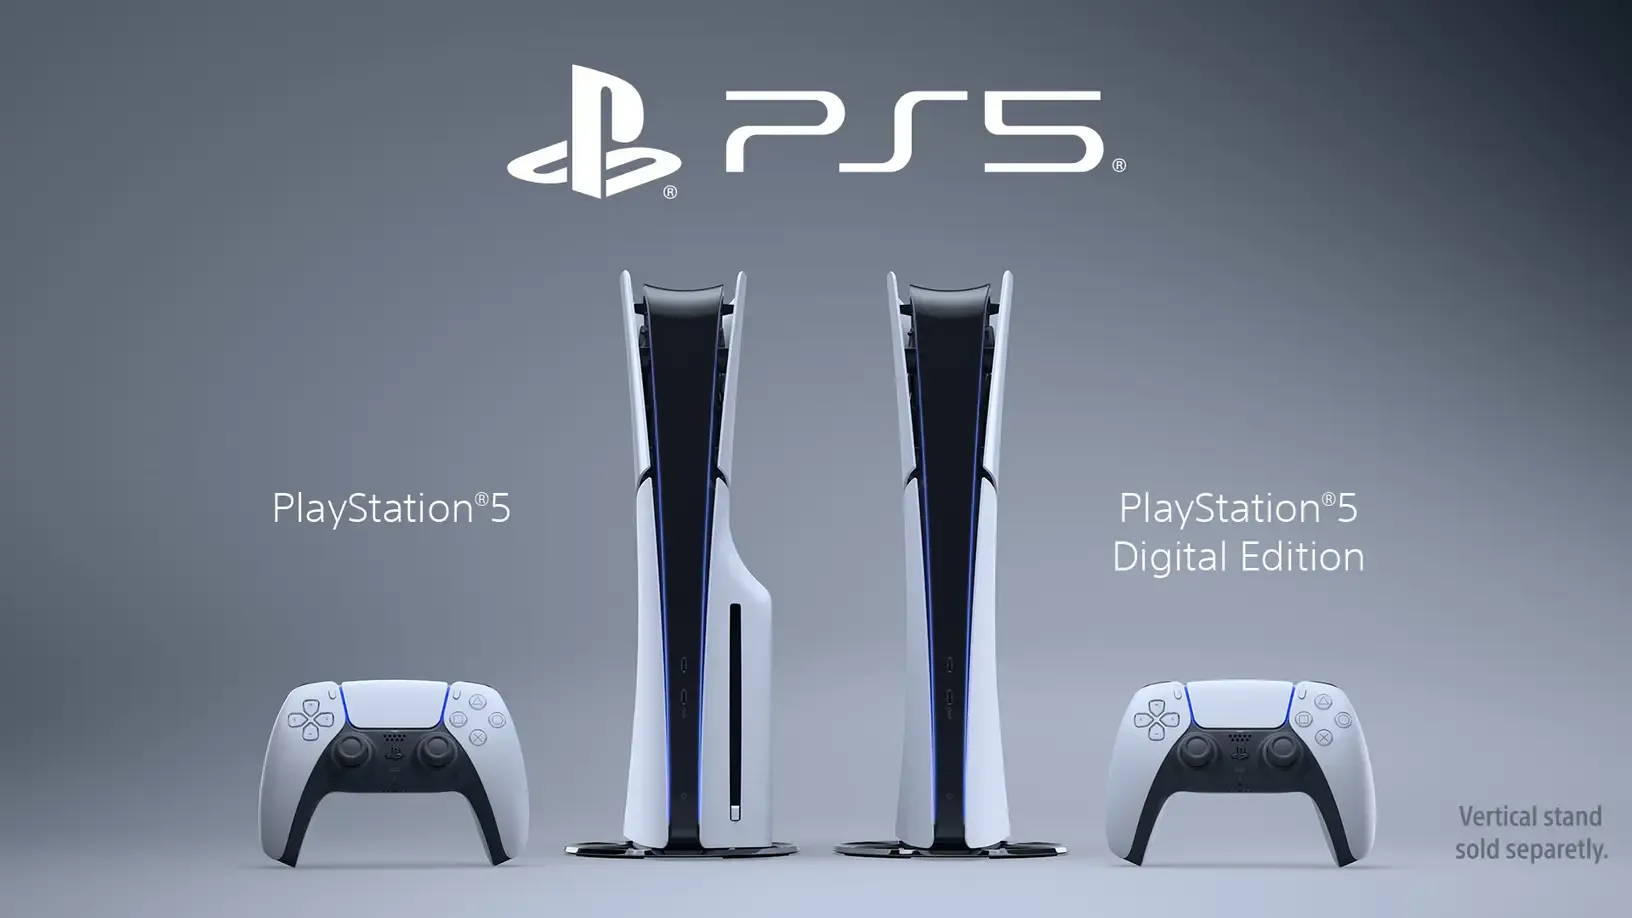 Introducing the Compact PS5 with Enhanced Features for the Holidays